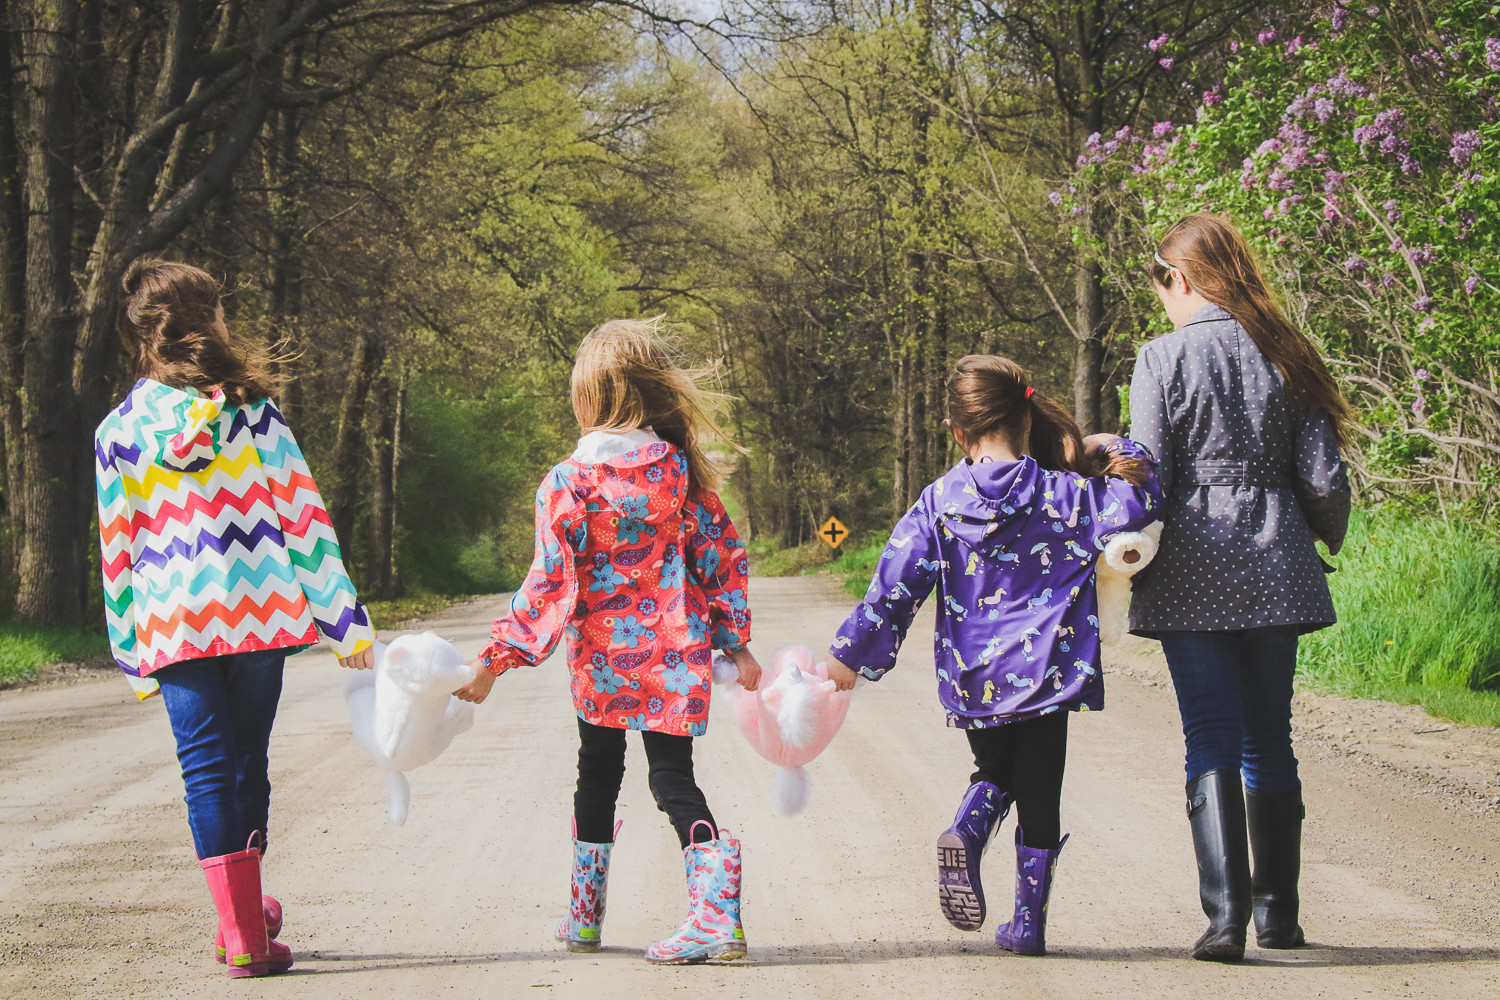 Four young girls walking away from the camera down a trail, each holding hands with a stuffed plush friend